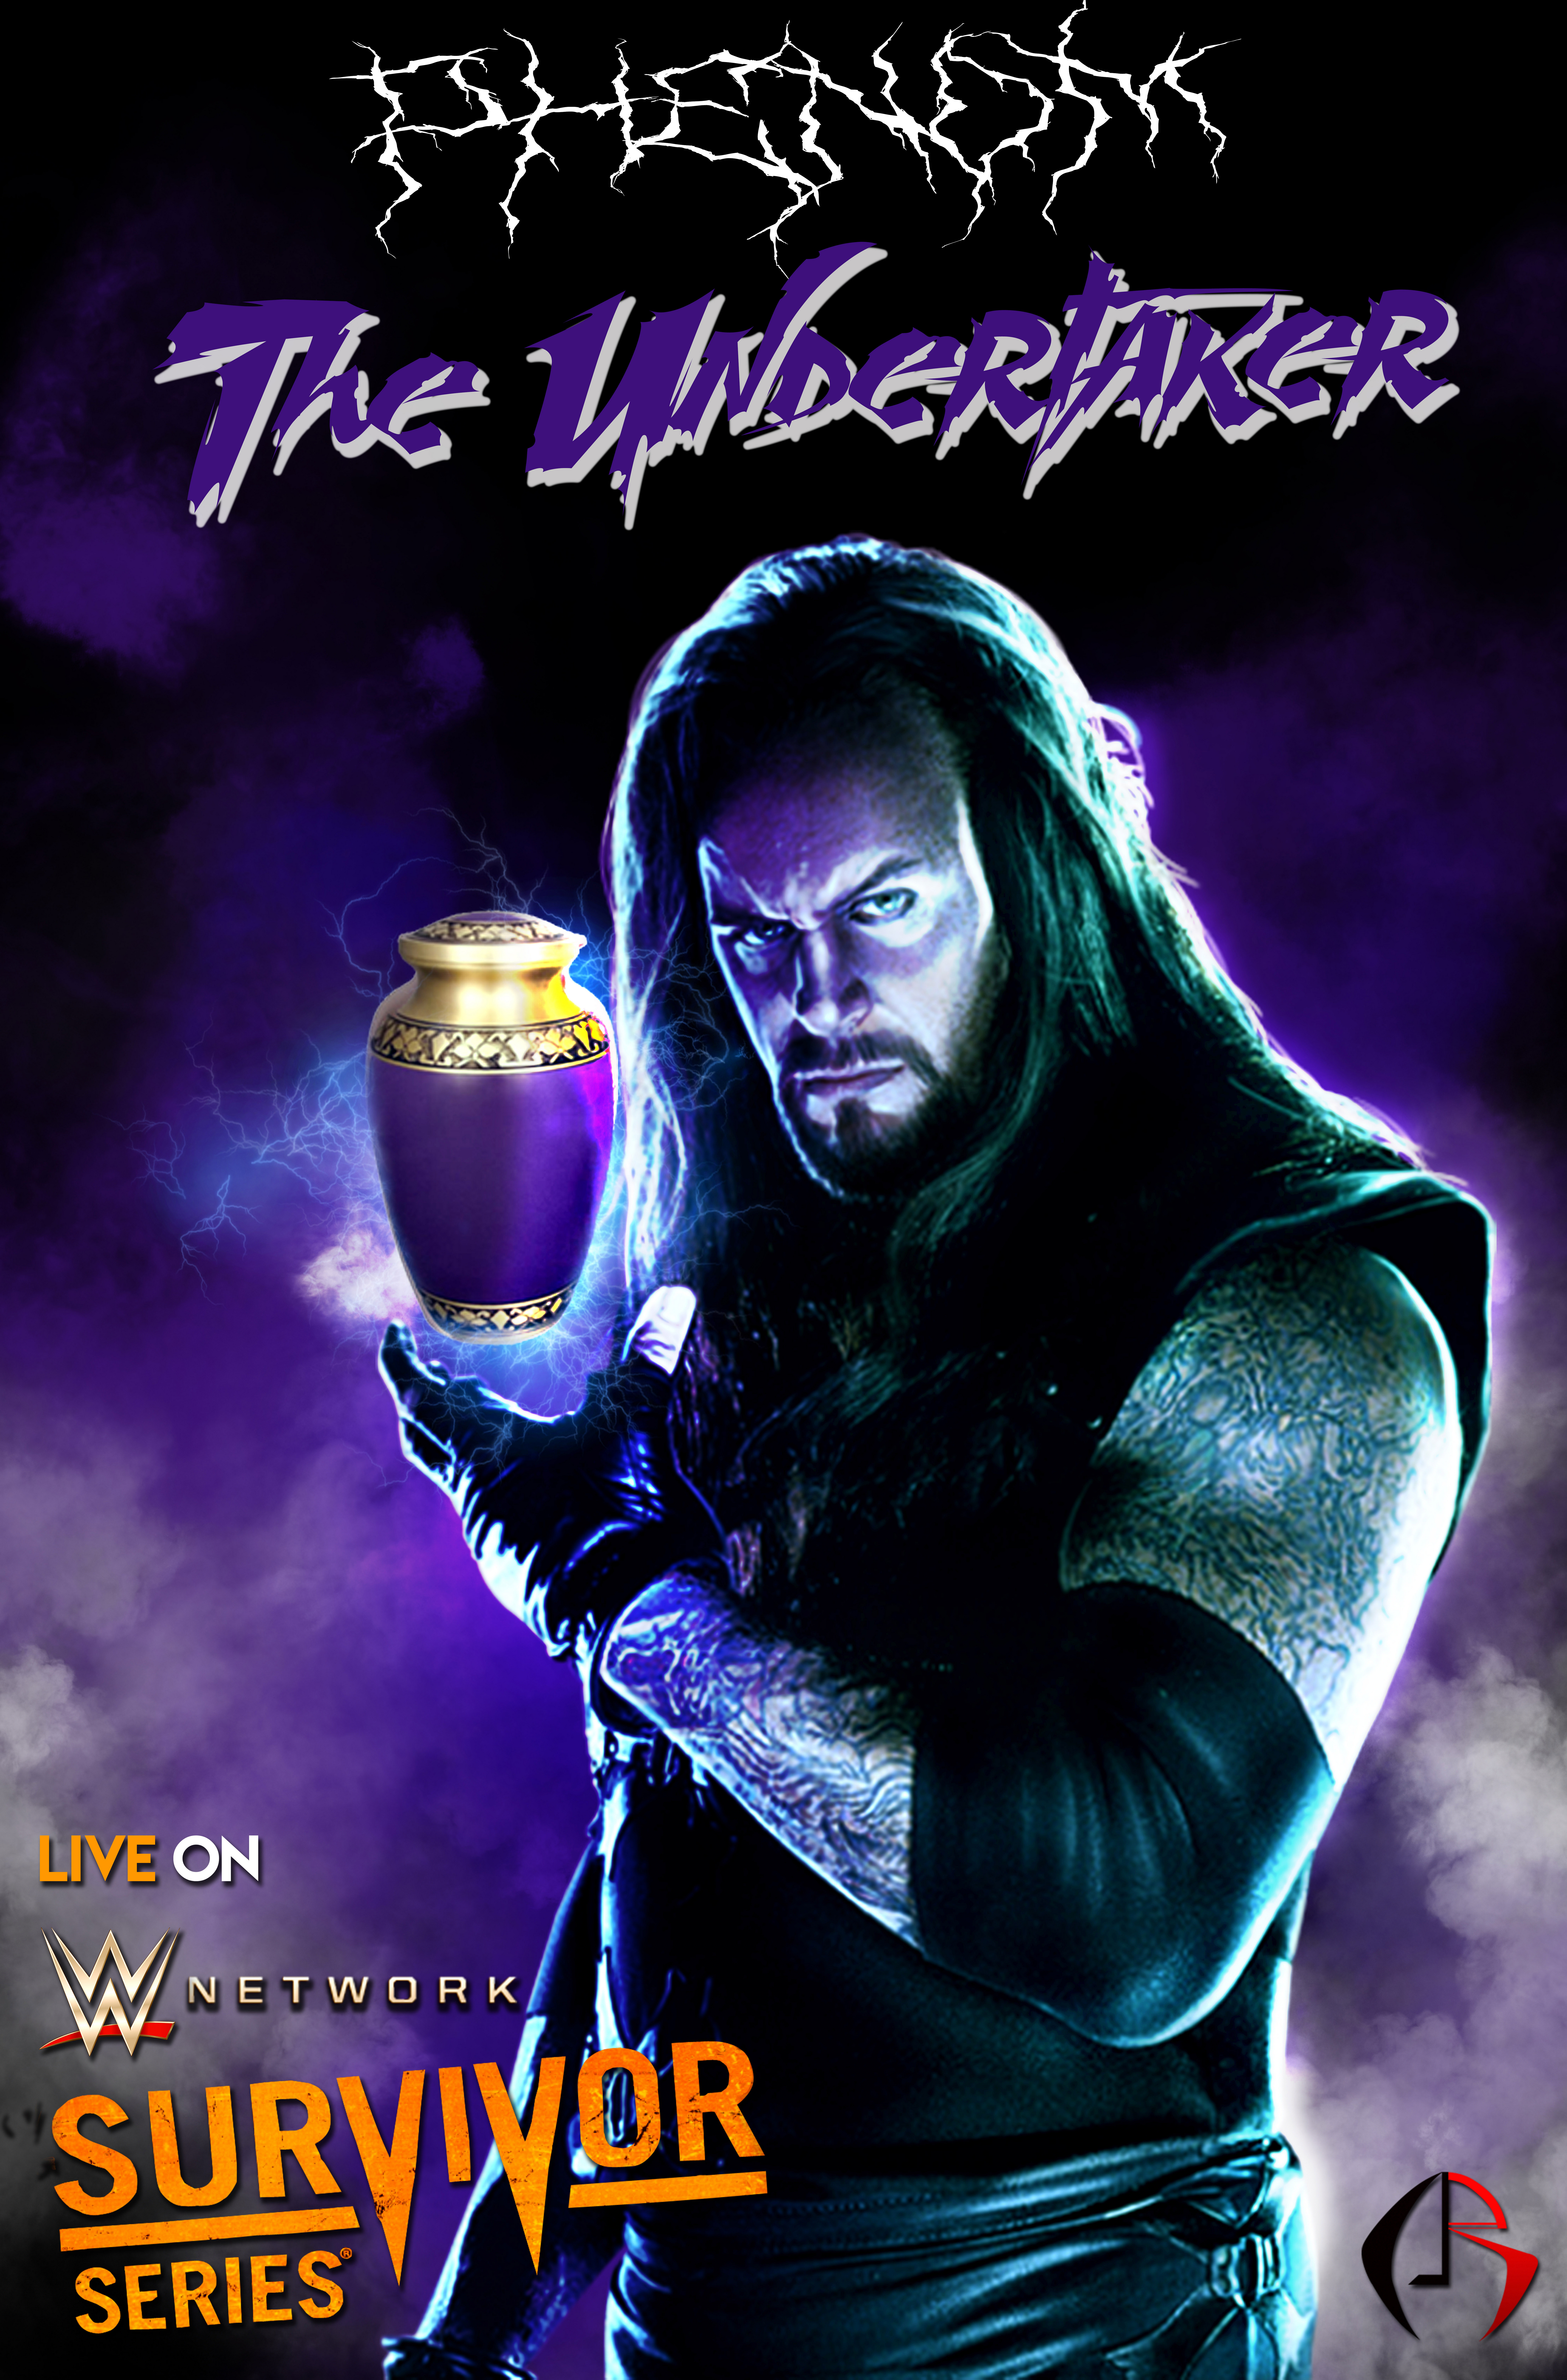 Wwe Image The Phenom Undertaker HD Wallpaper And Background